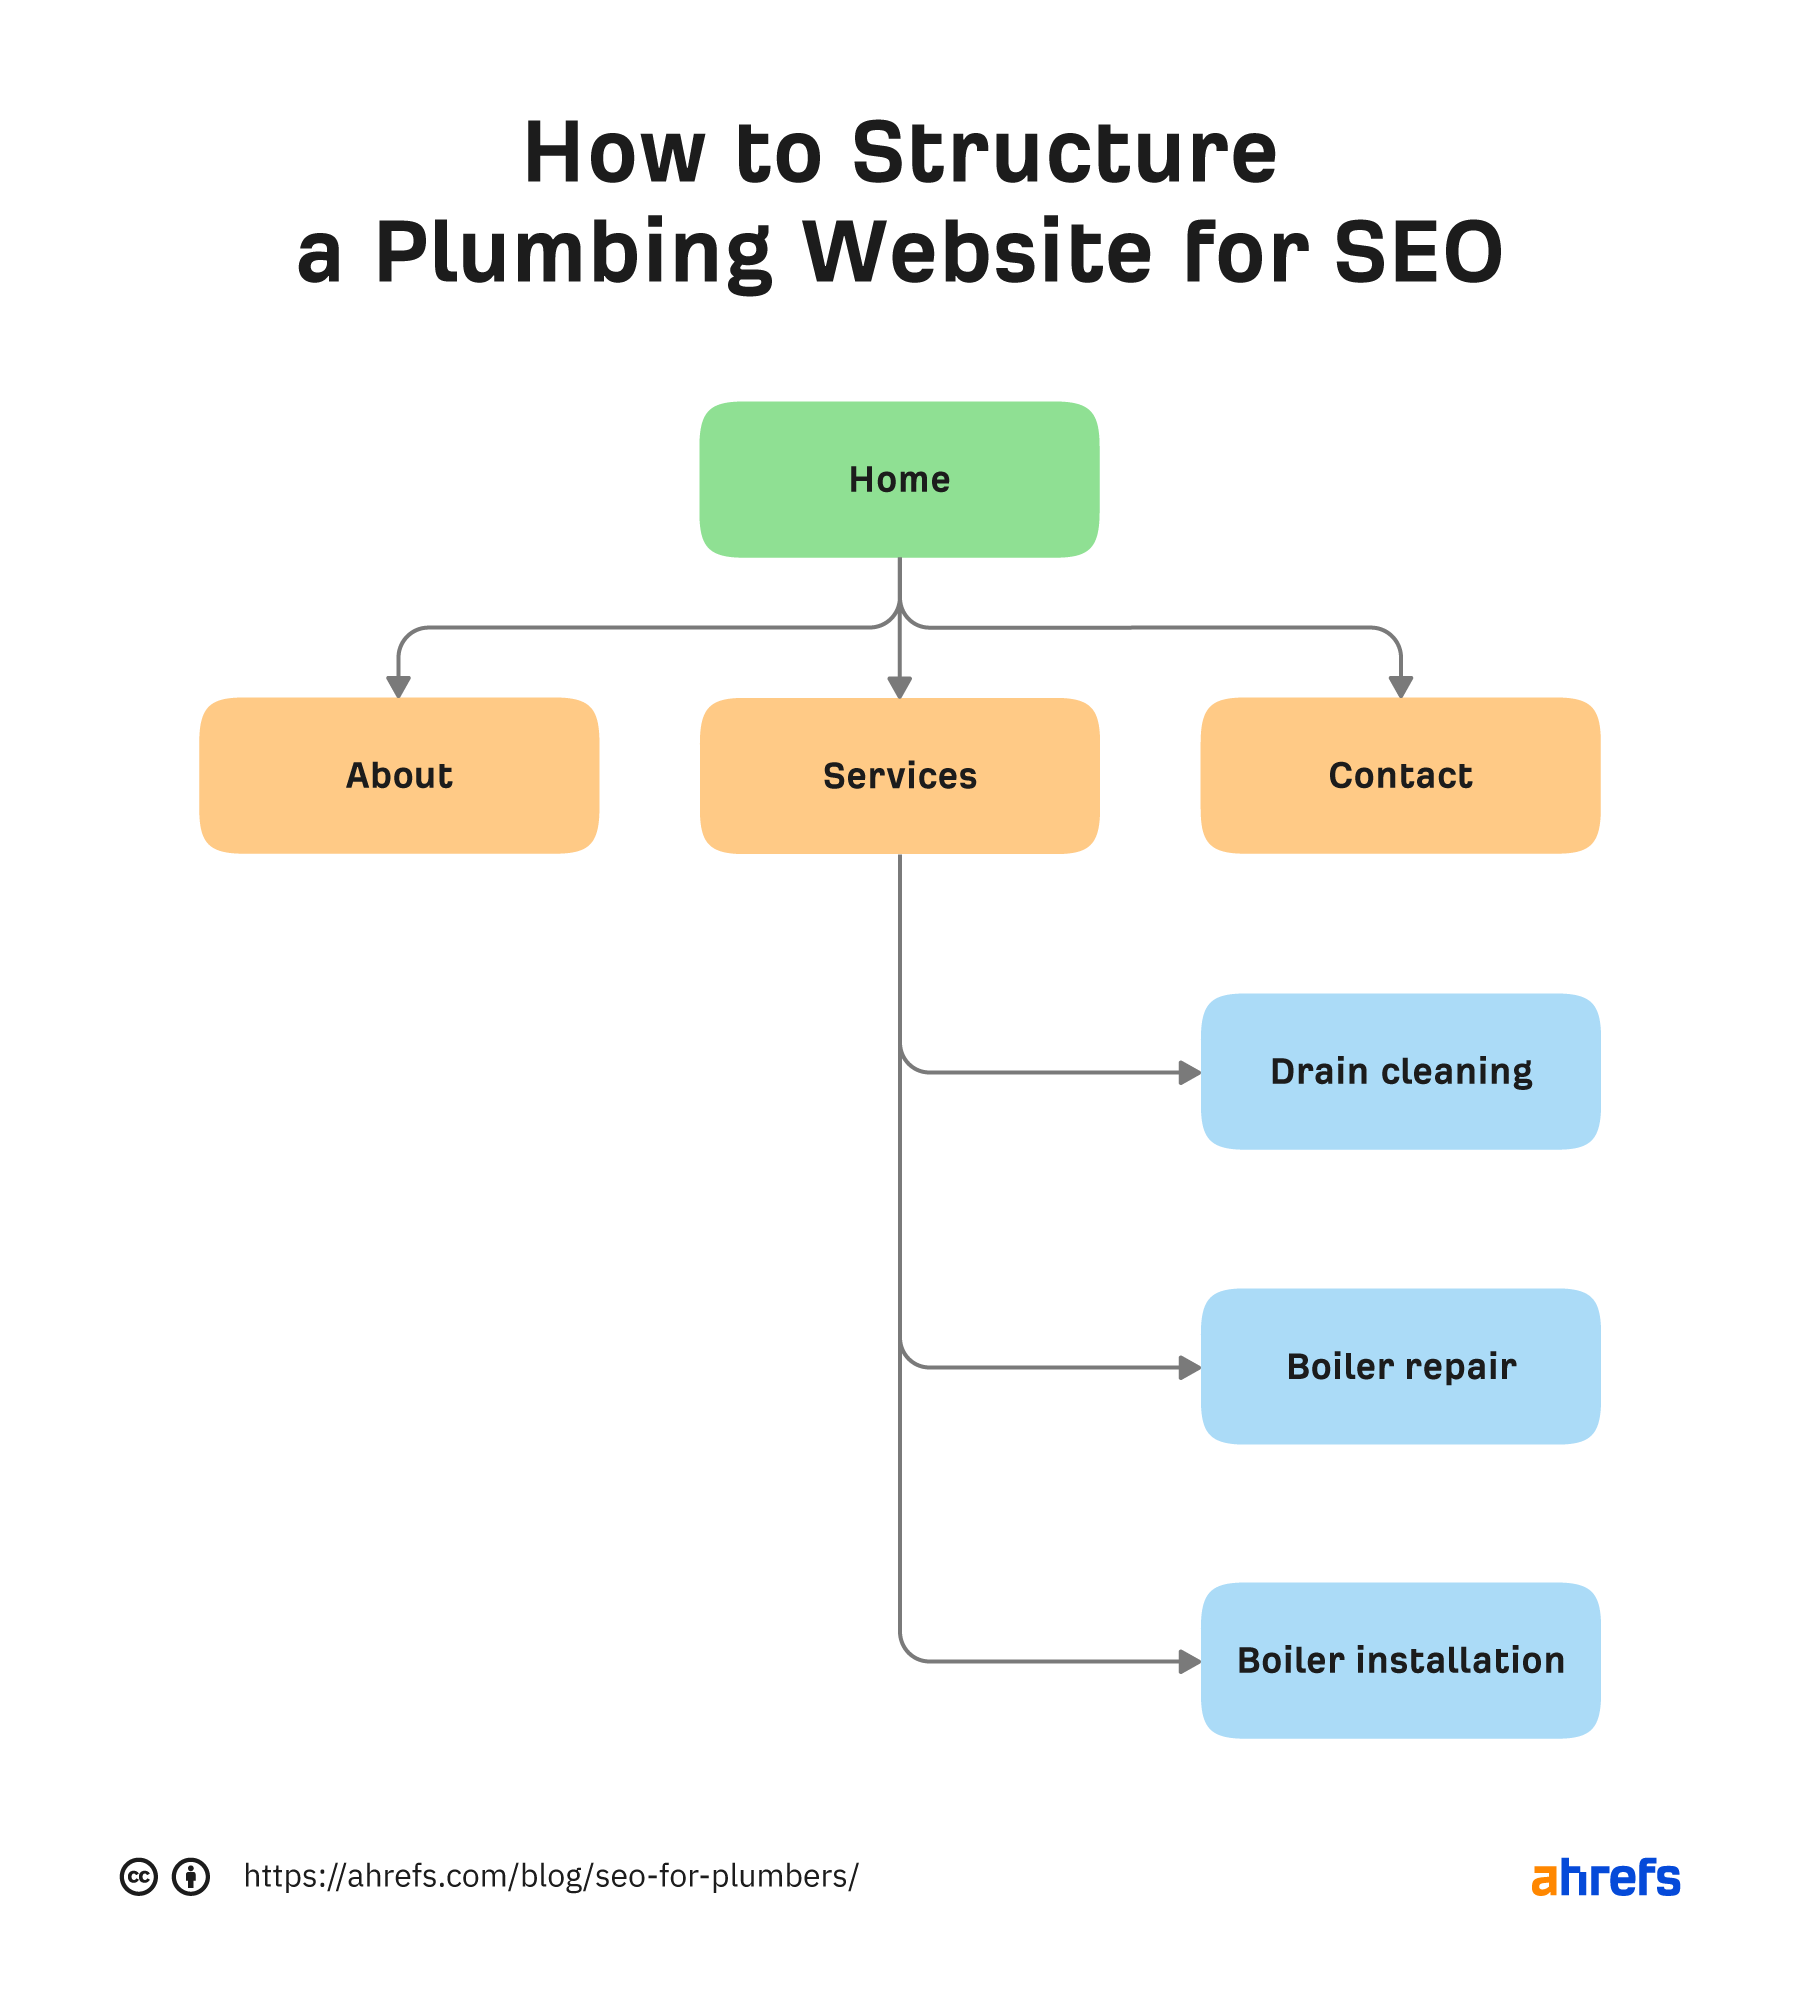 How to structure a plumbing website for SEO
